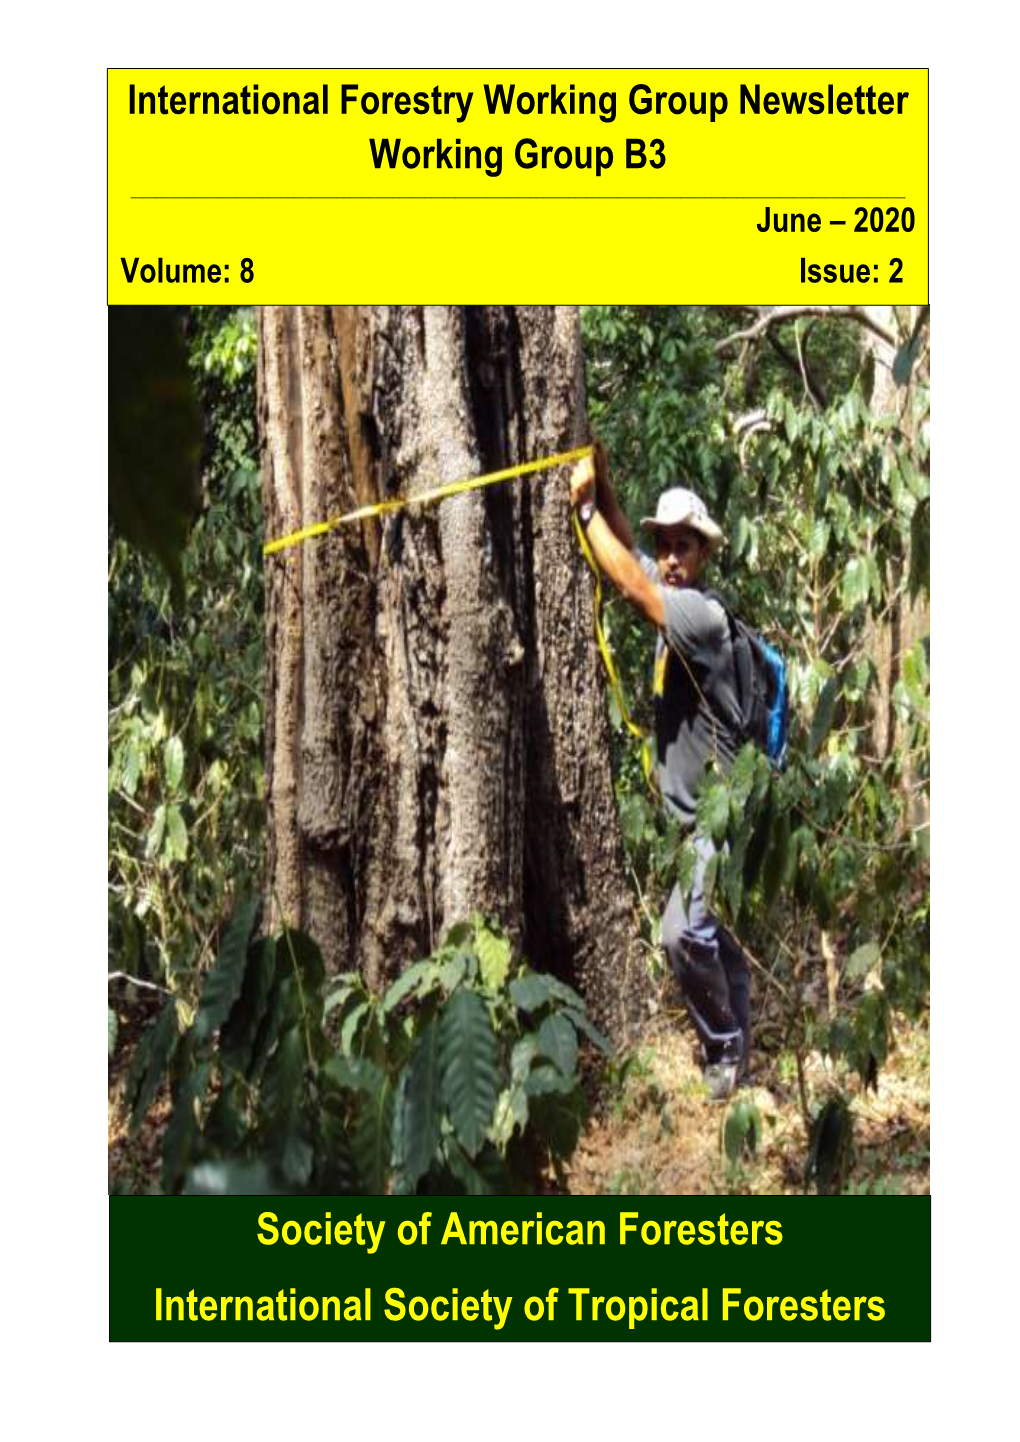 International Forestry Working Group Newsletter Working Group B3 ______June – 2020